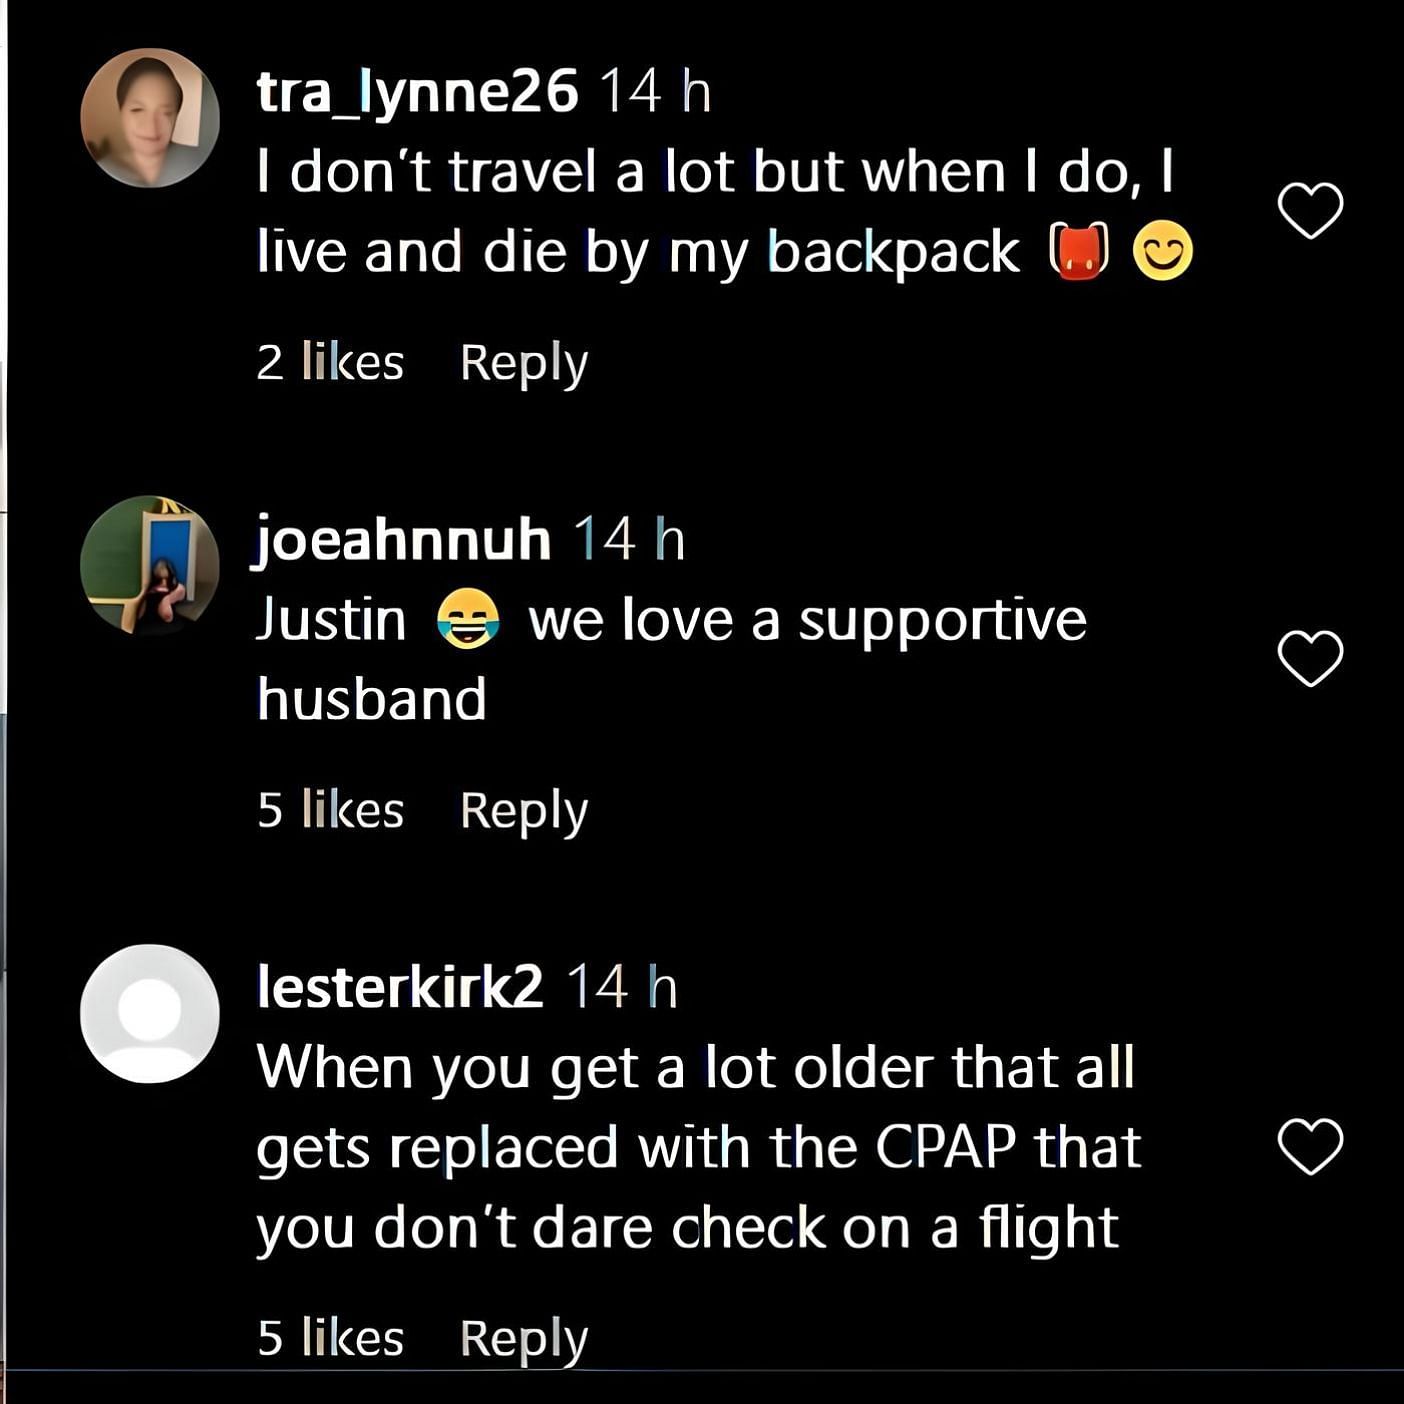 Upton gets a range of responses from fans regarding her essential travel items